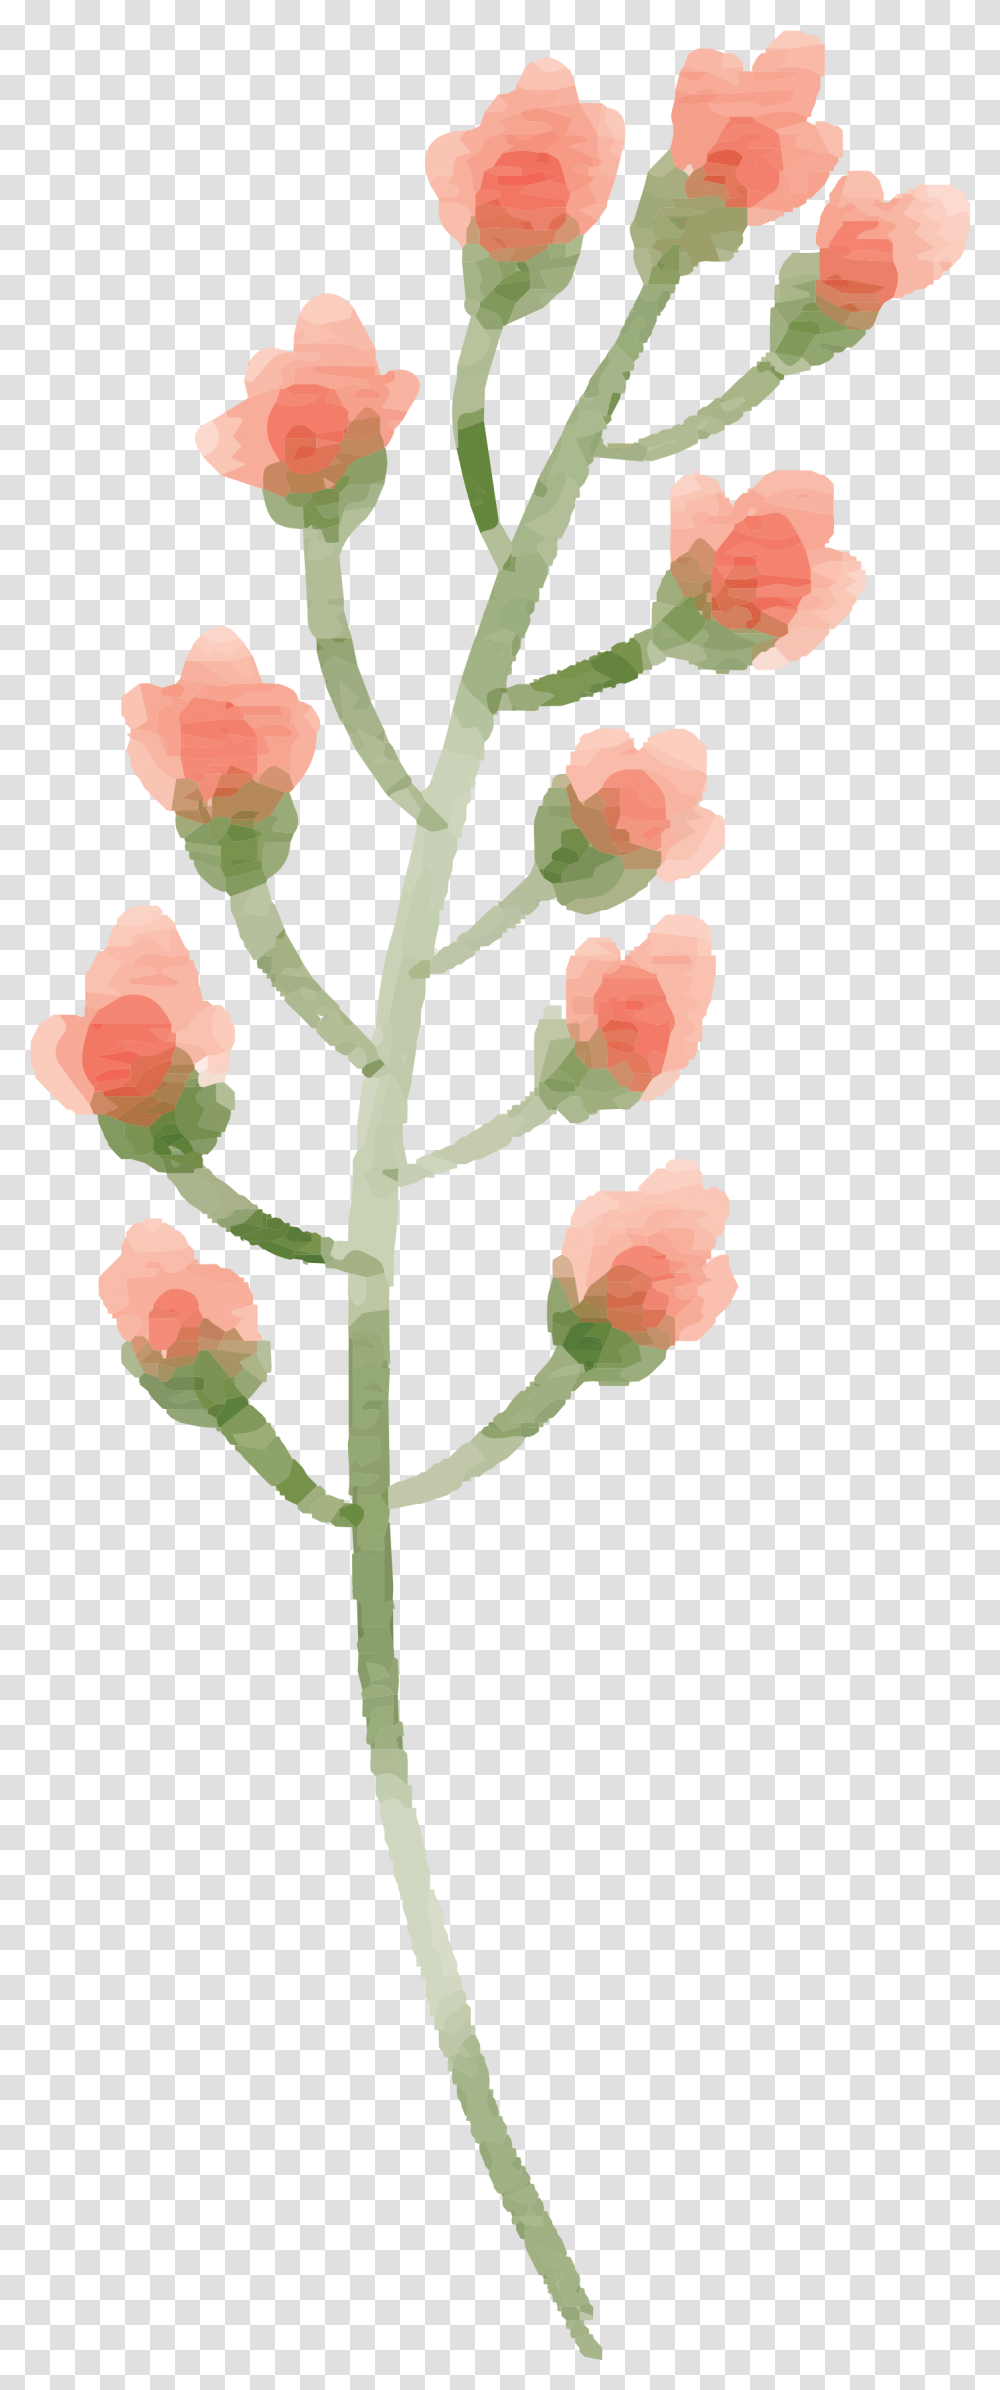 Watercolor Flower Images Peach Delight Watercolor Painting, Plant, Blossom, Carnation, Bud Transparent Png